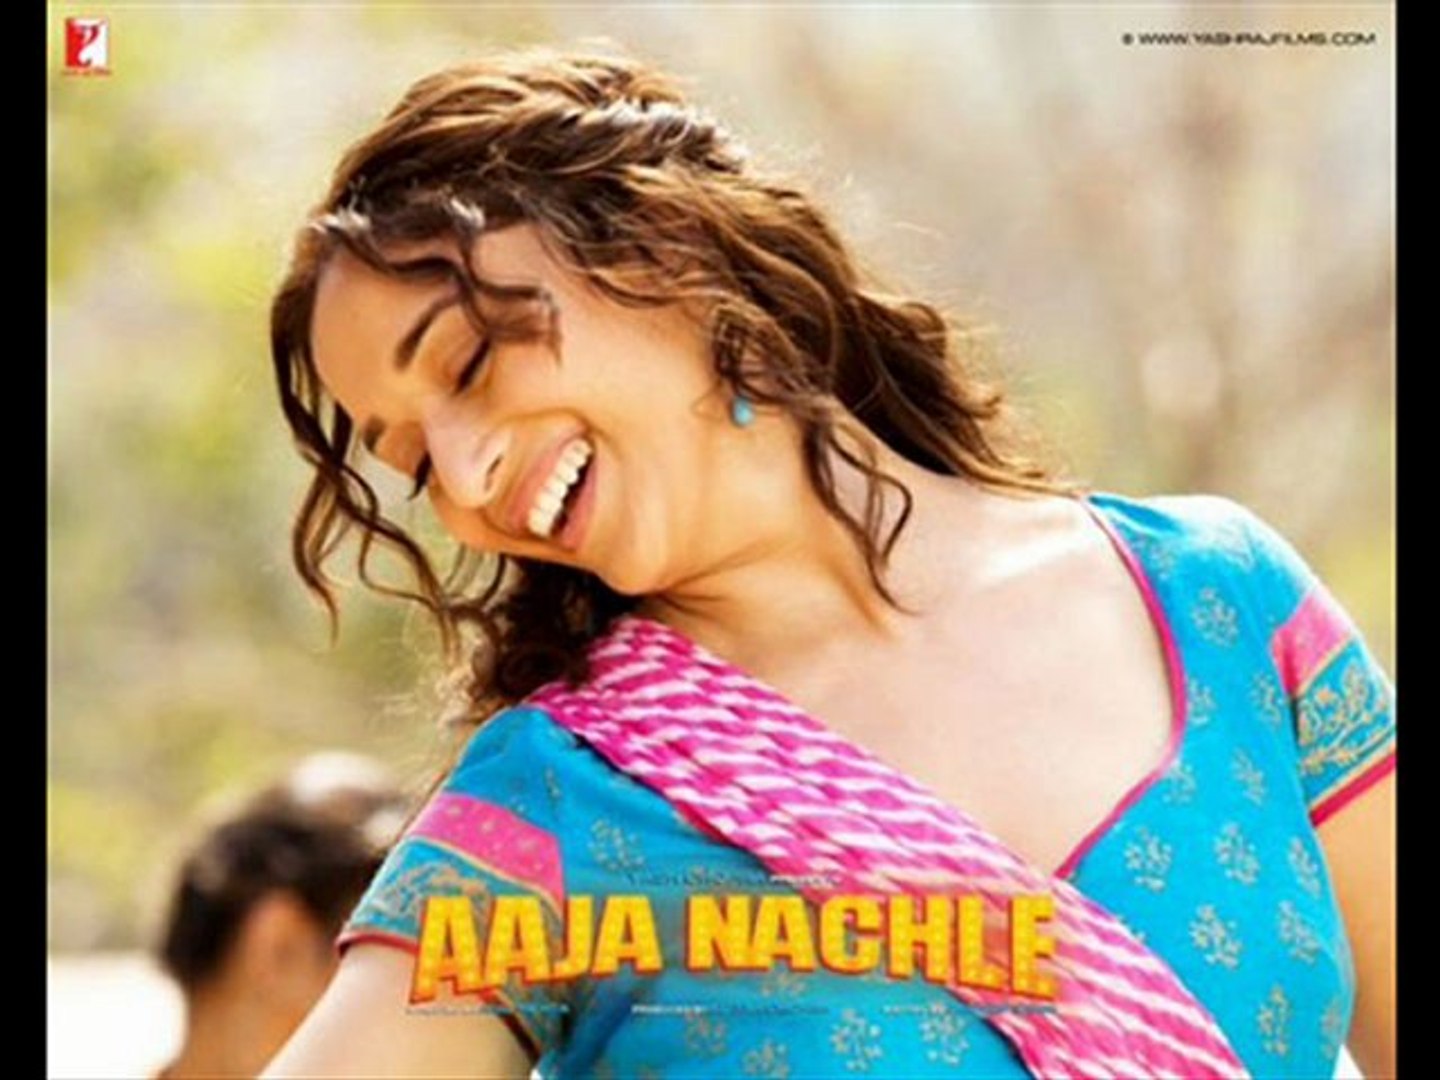 download aaja nachle songs mp3 free - video Dailymotion